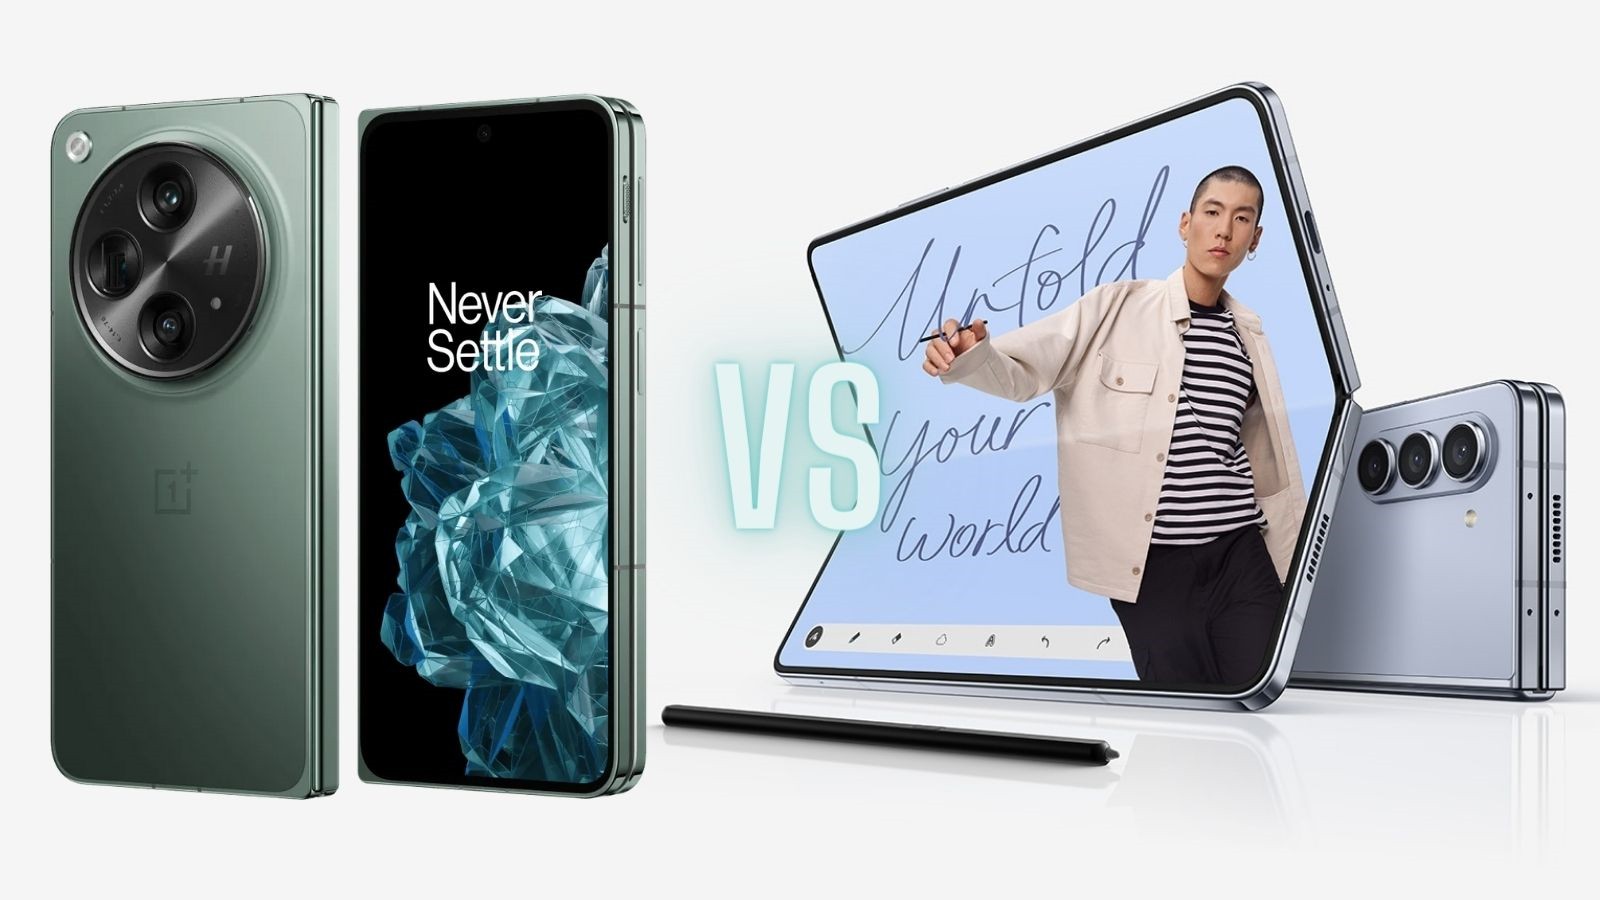 The Samsung Galaxy Note 10 Lite is a serious threat to OnePlus in India